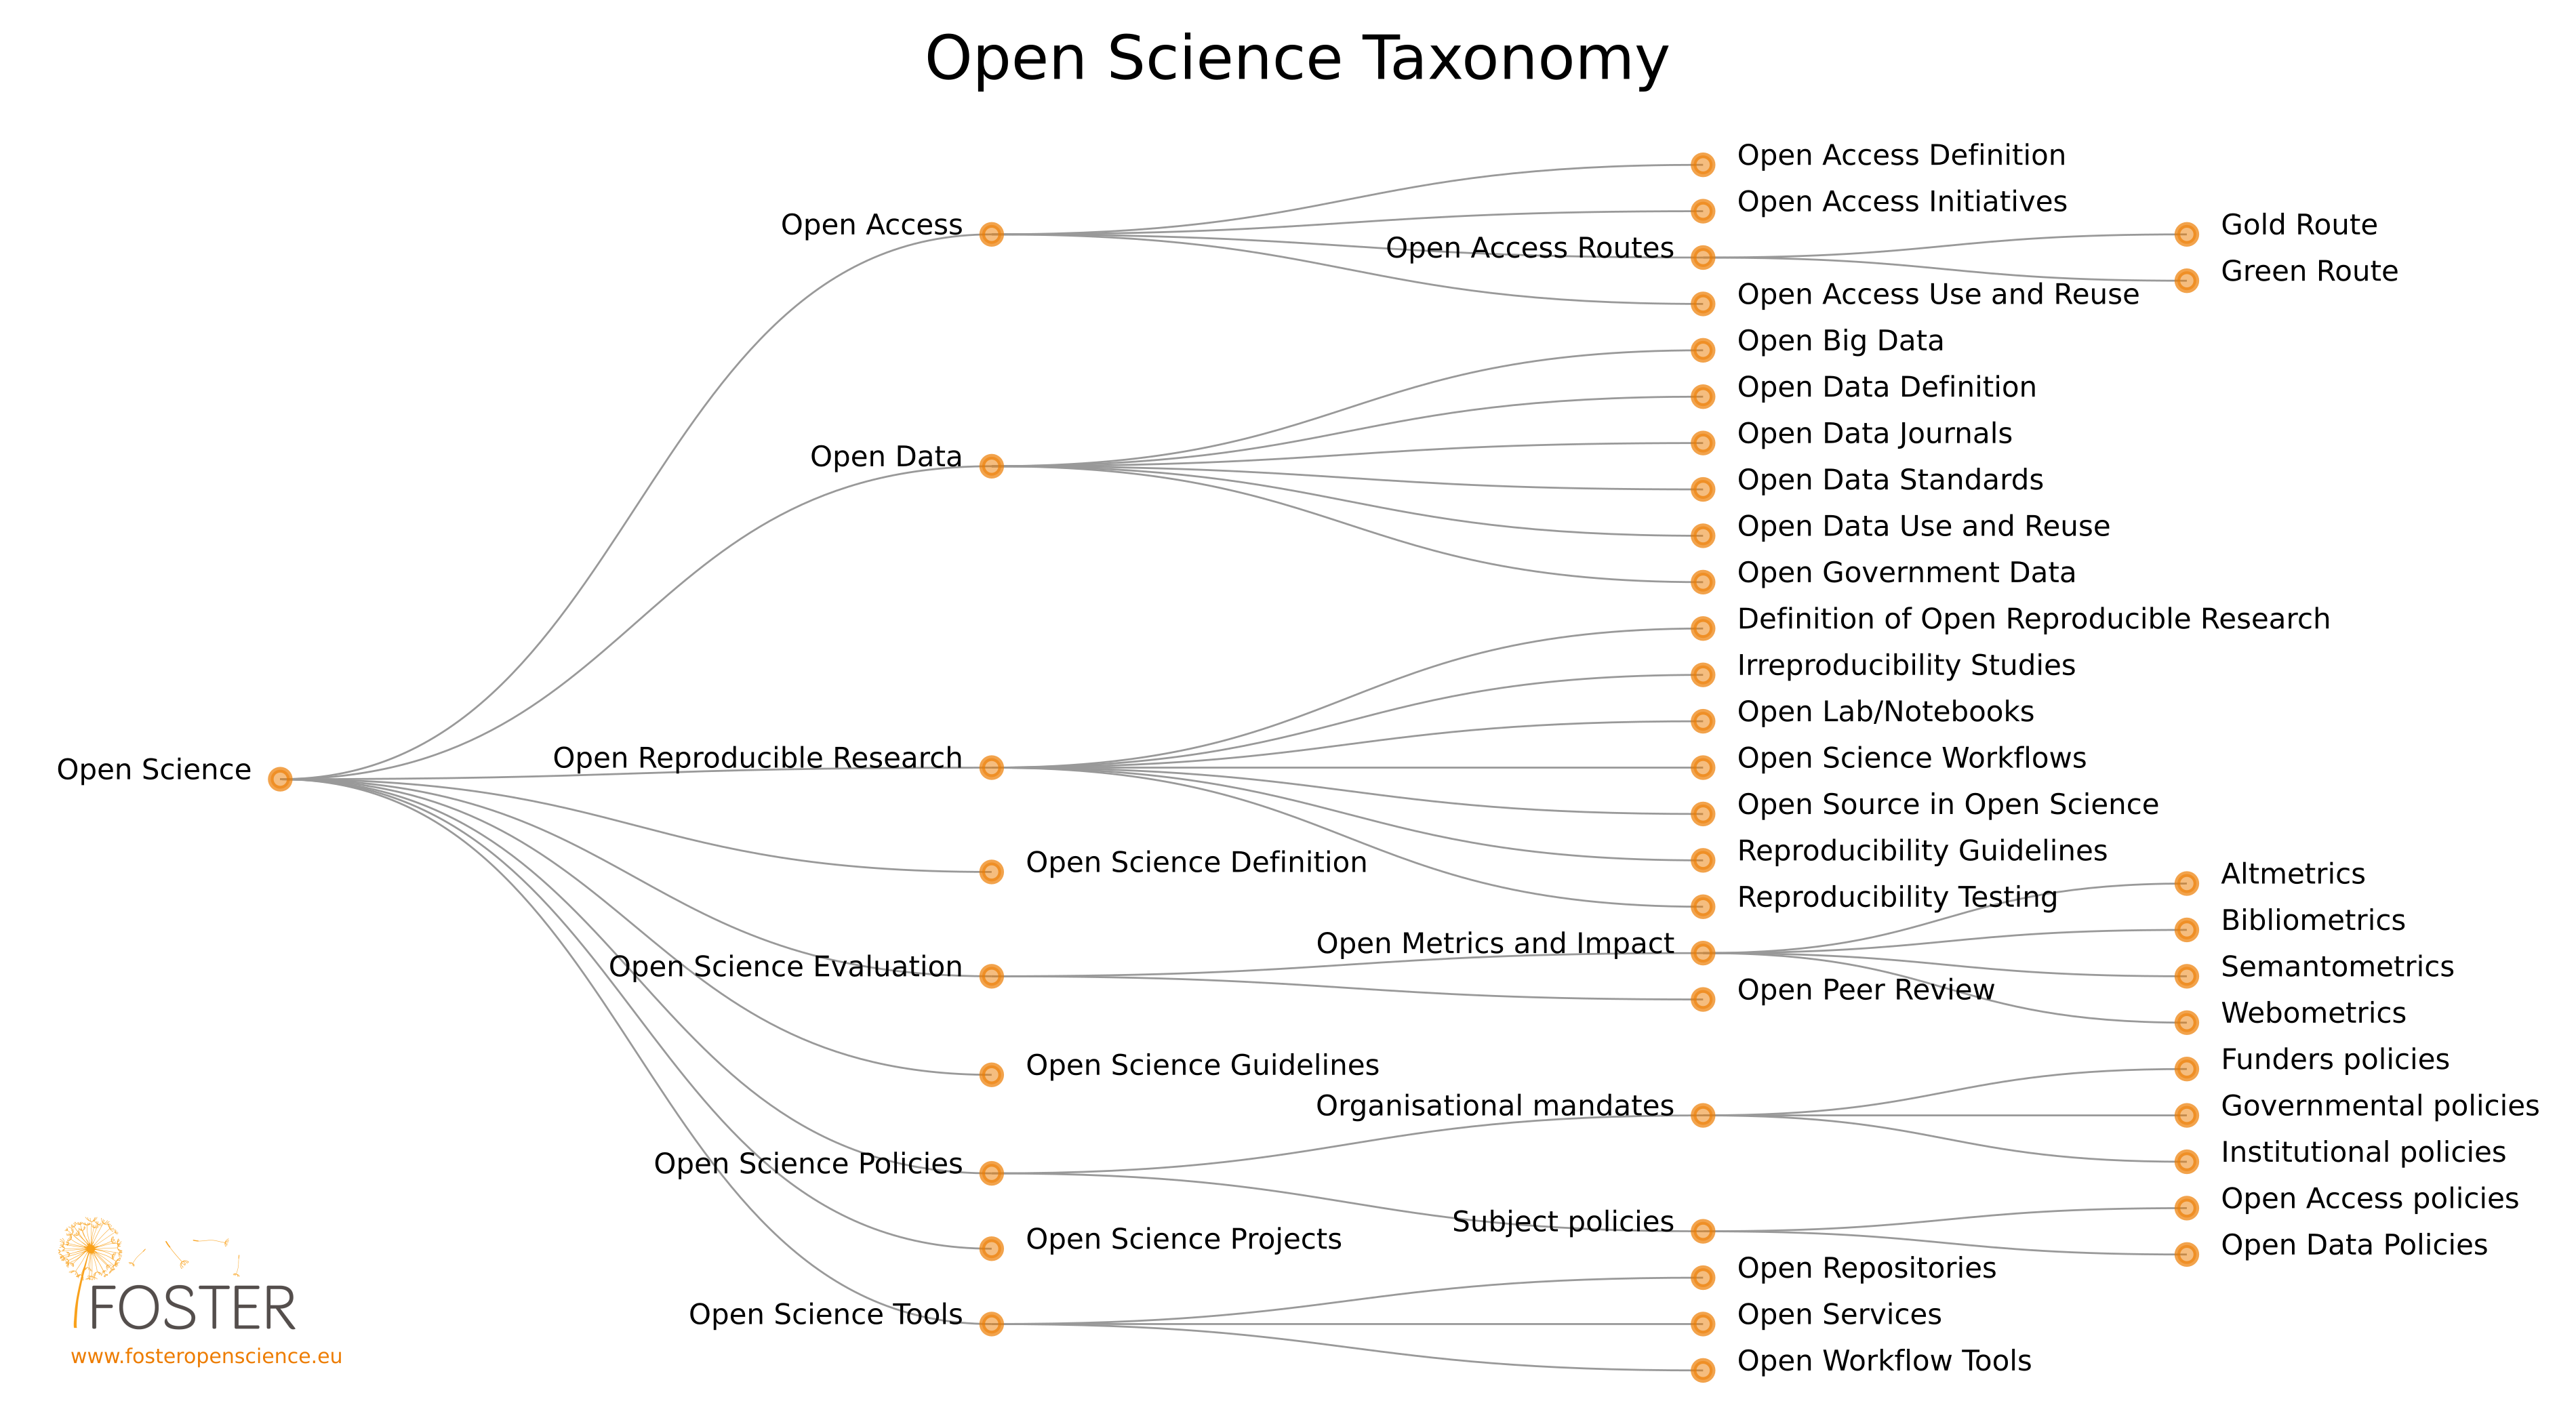 https://www.fosteropenscience.eu/themes/fosterstrap/images/taxonomies/os_taxonomy.png